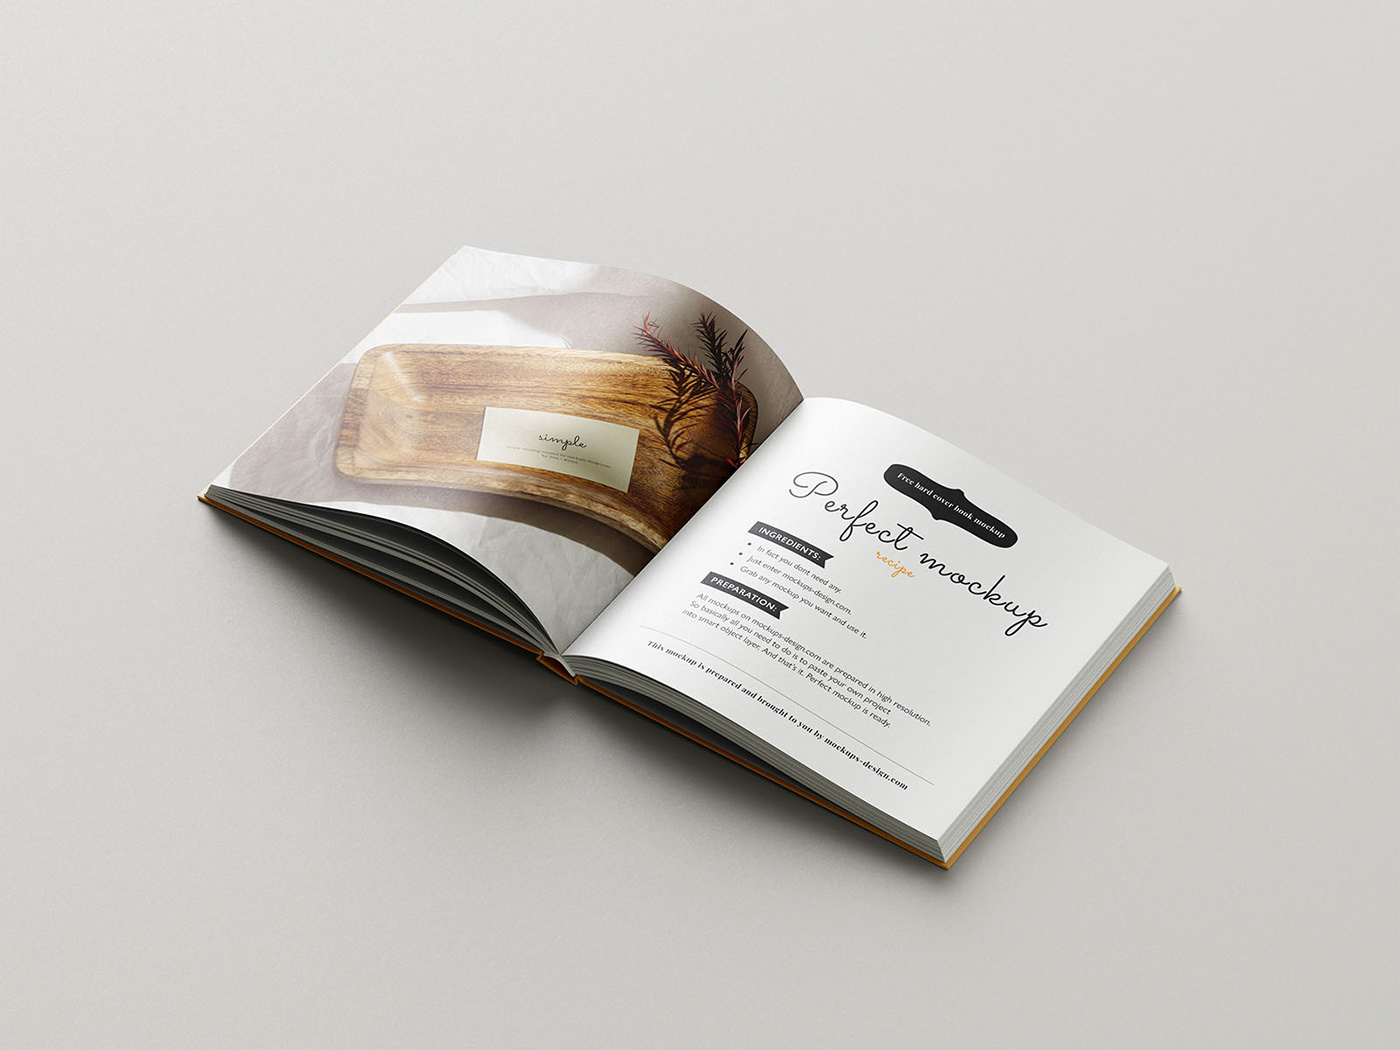 book square cover page pages hardcover Mockup psd template download